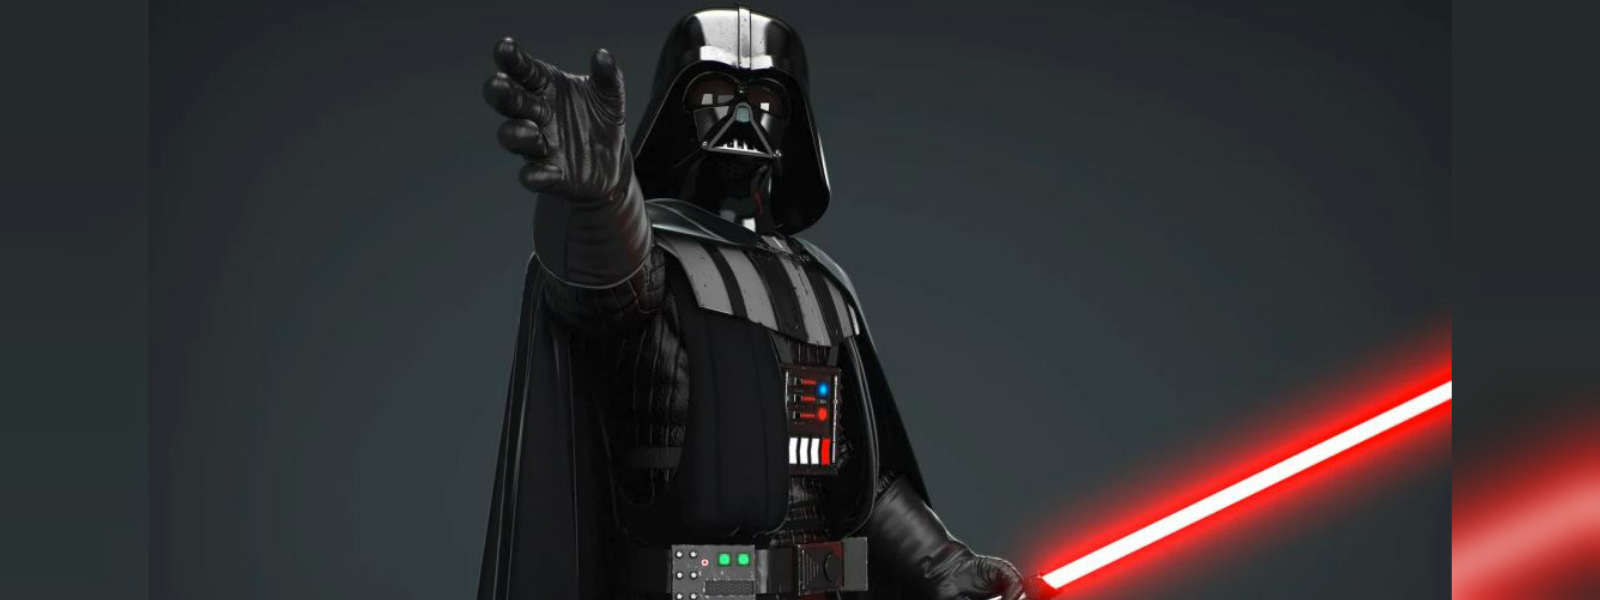 Darth Vader continues Star Wars story in VR